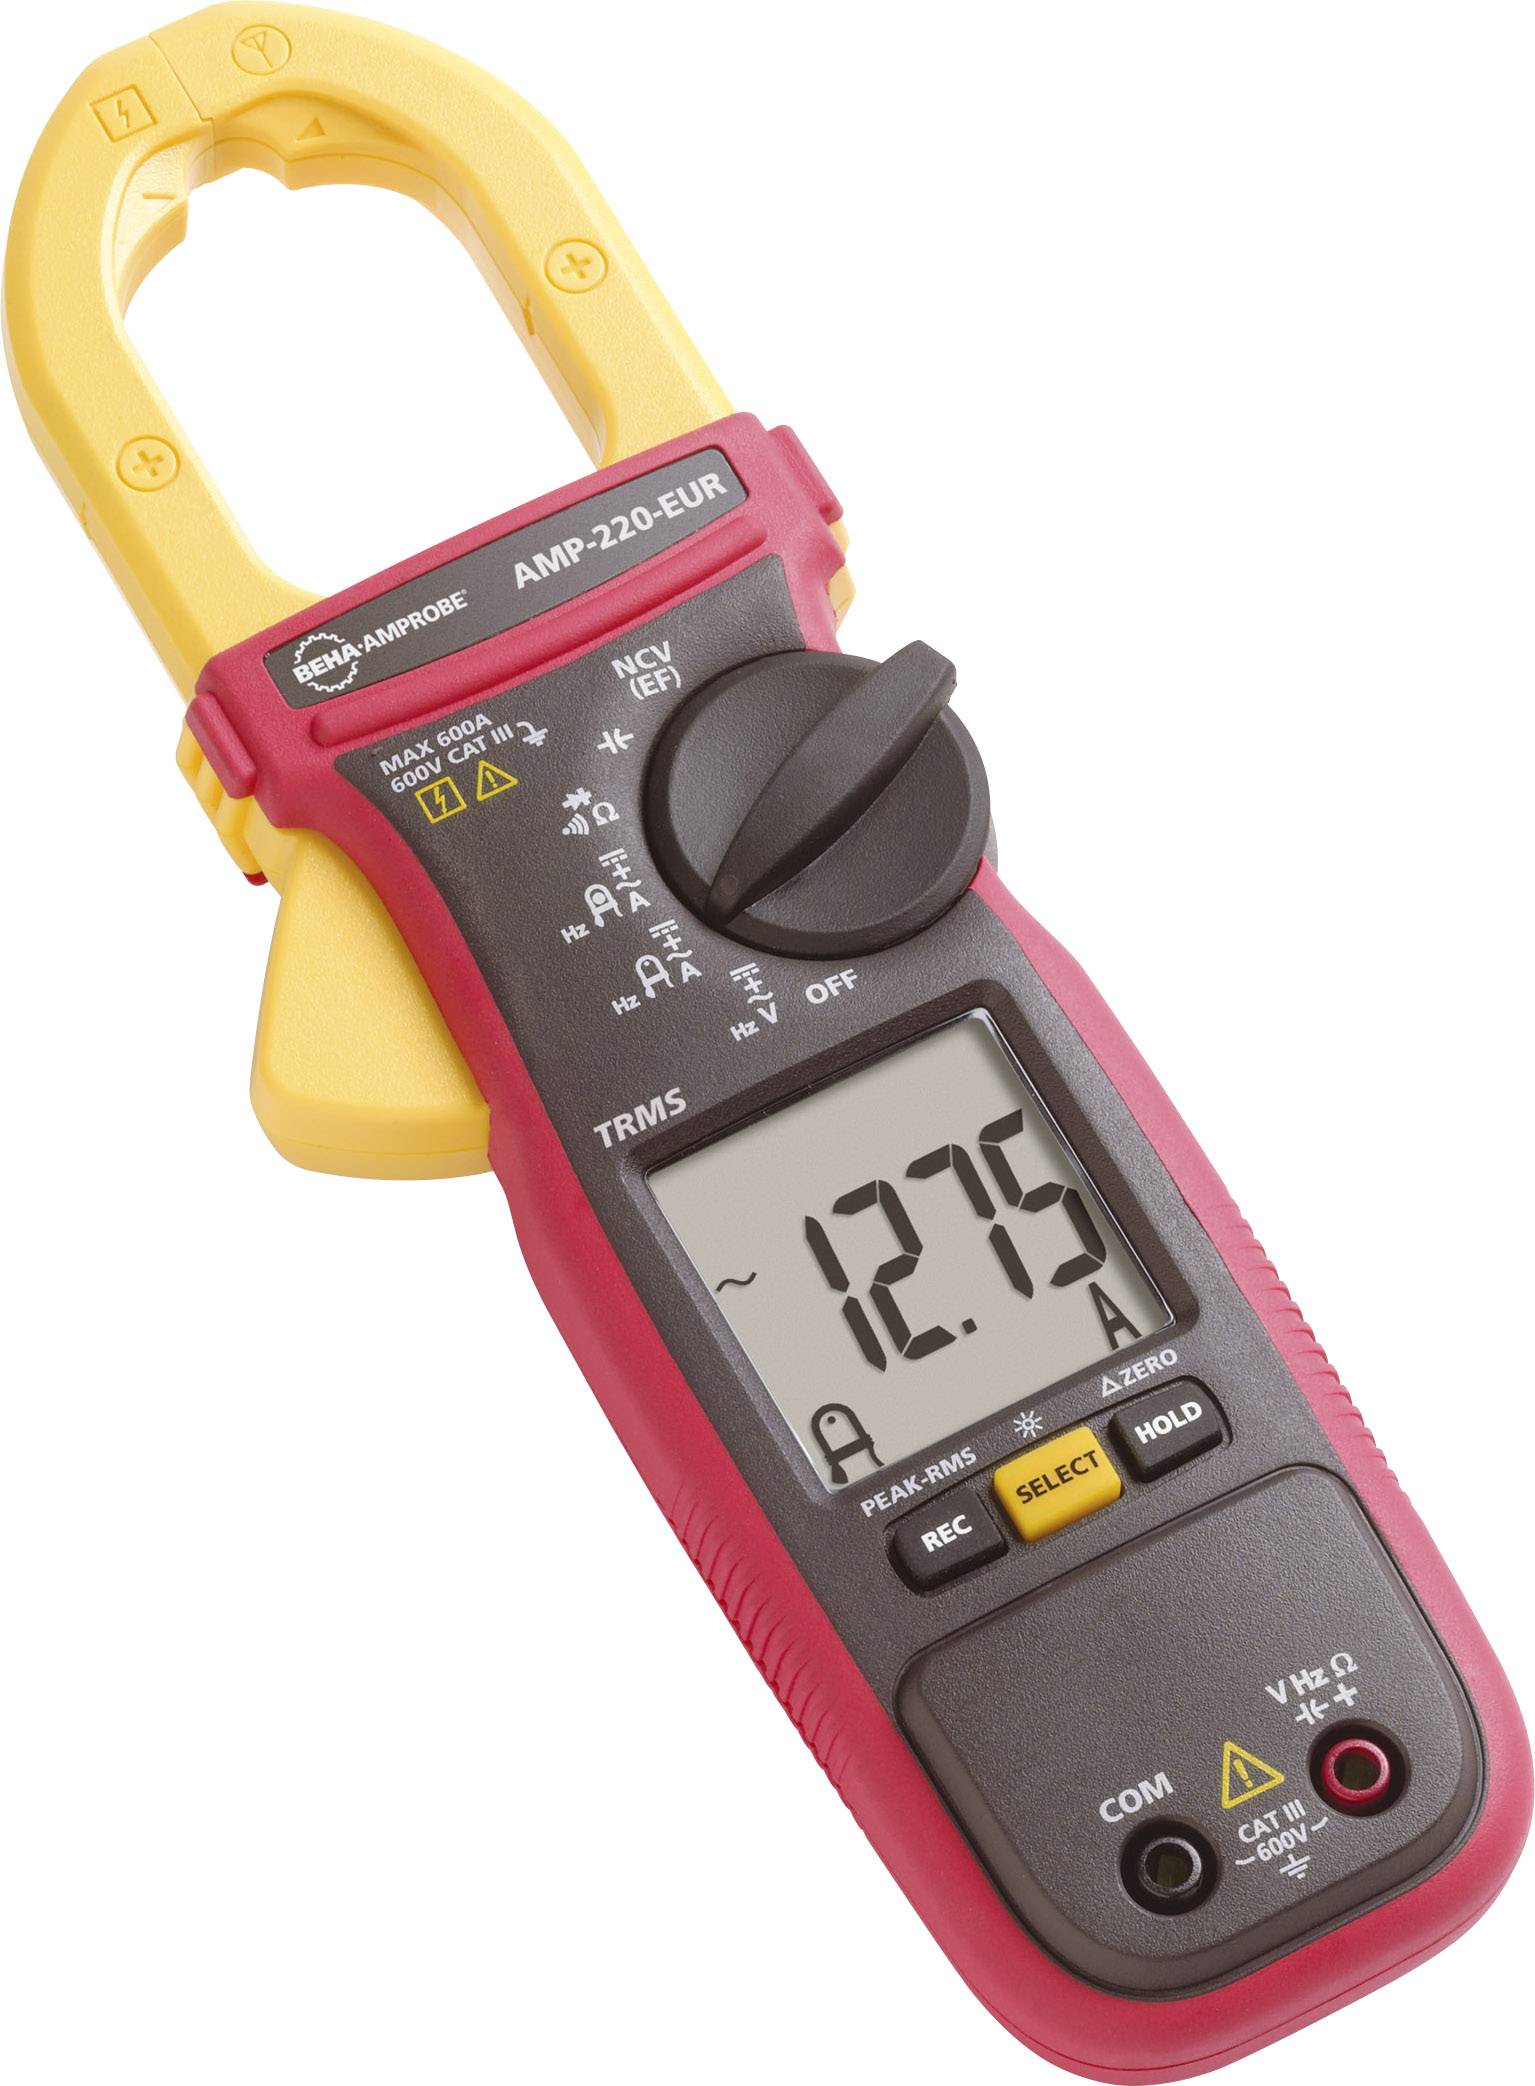 BEHA AMP-220-EUR 600A ACDC TRMS Clamp Multimeter 4560596